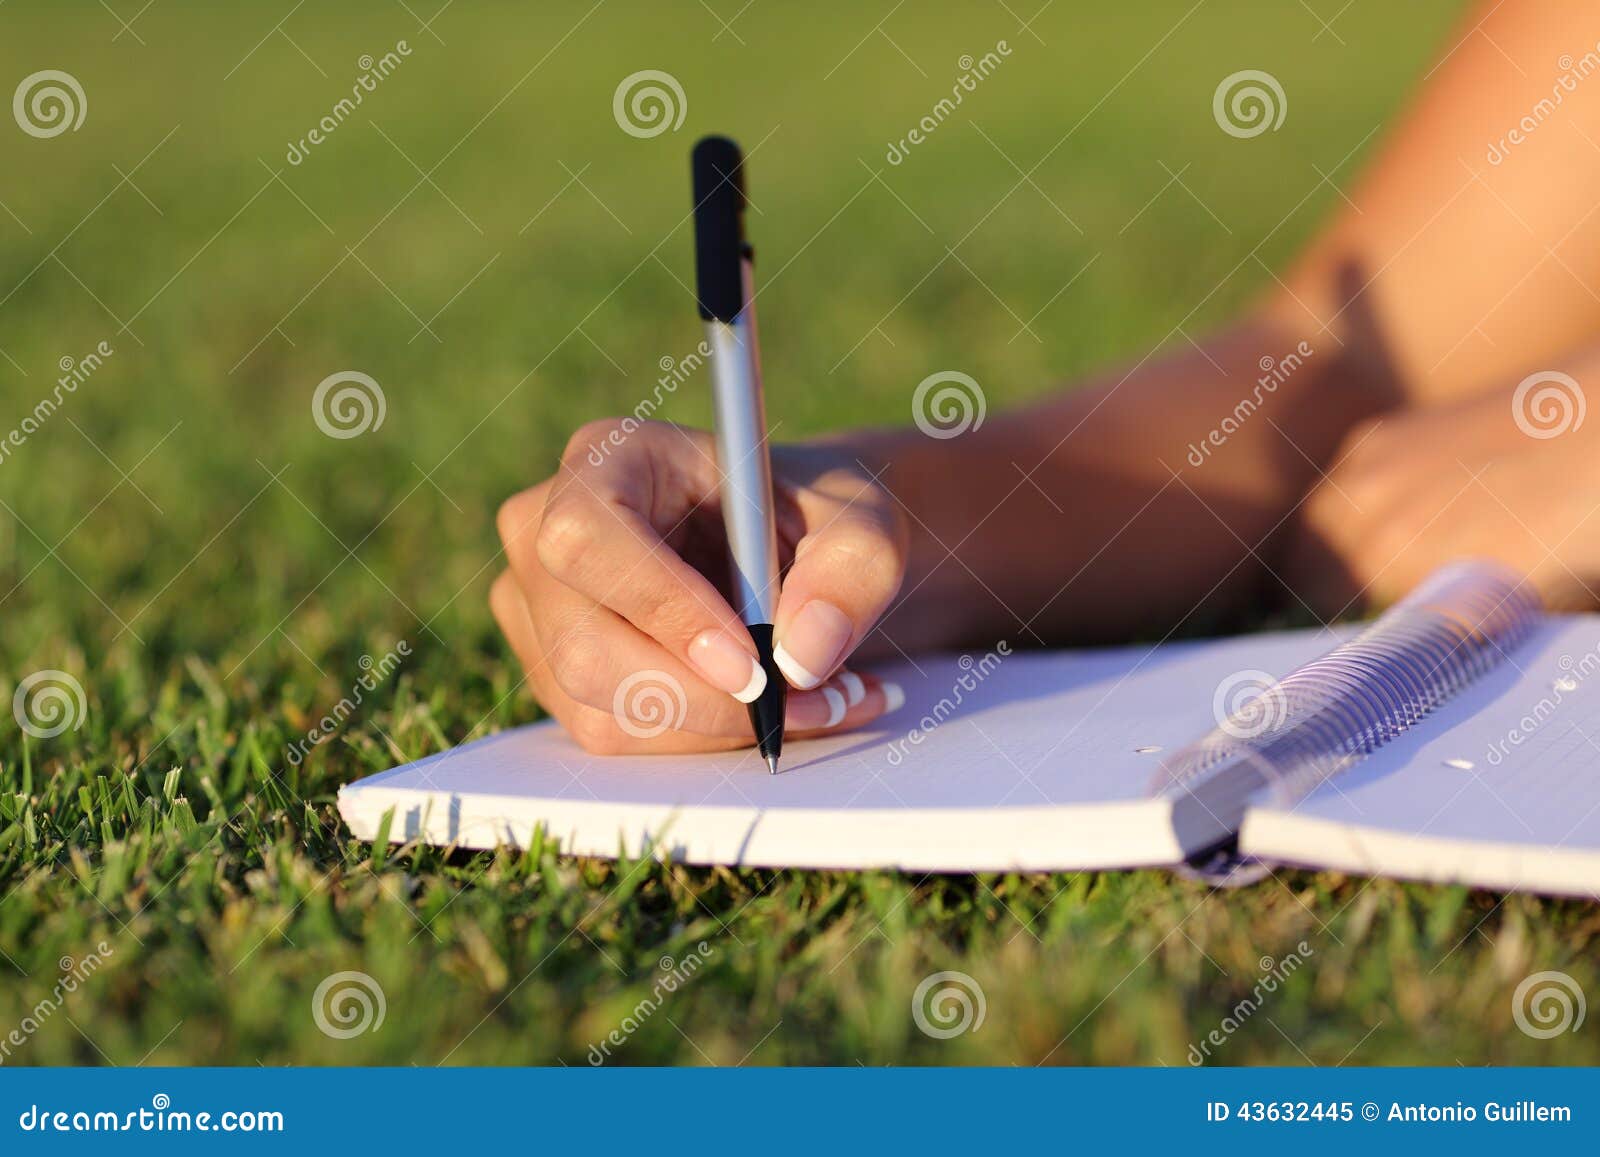 close up of a woman hand writing on a notebook outdoor